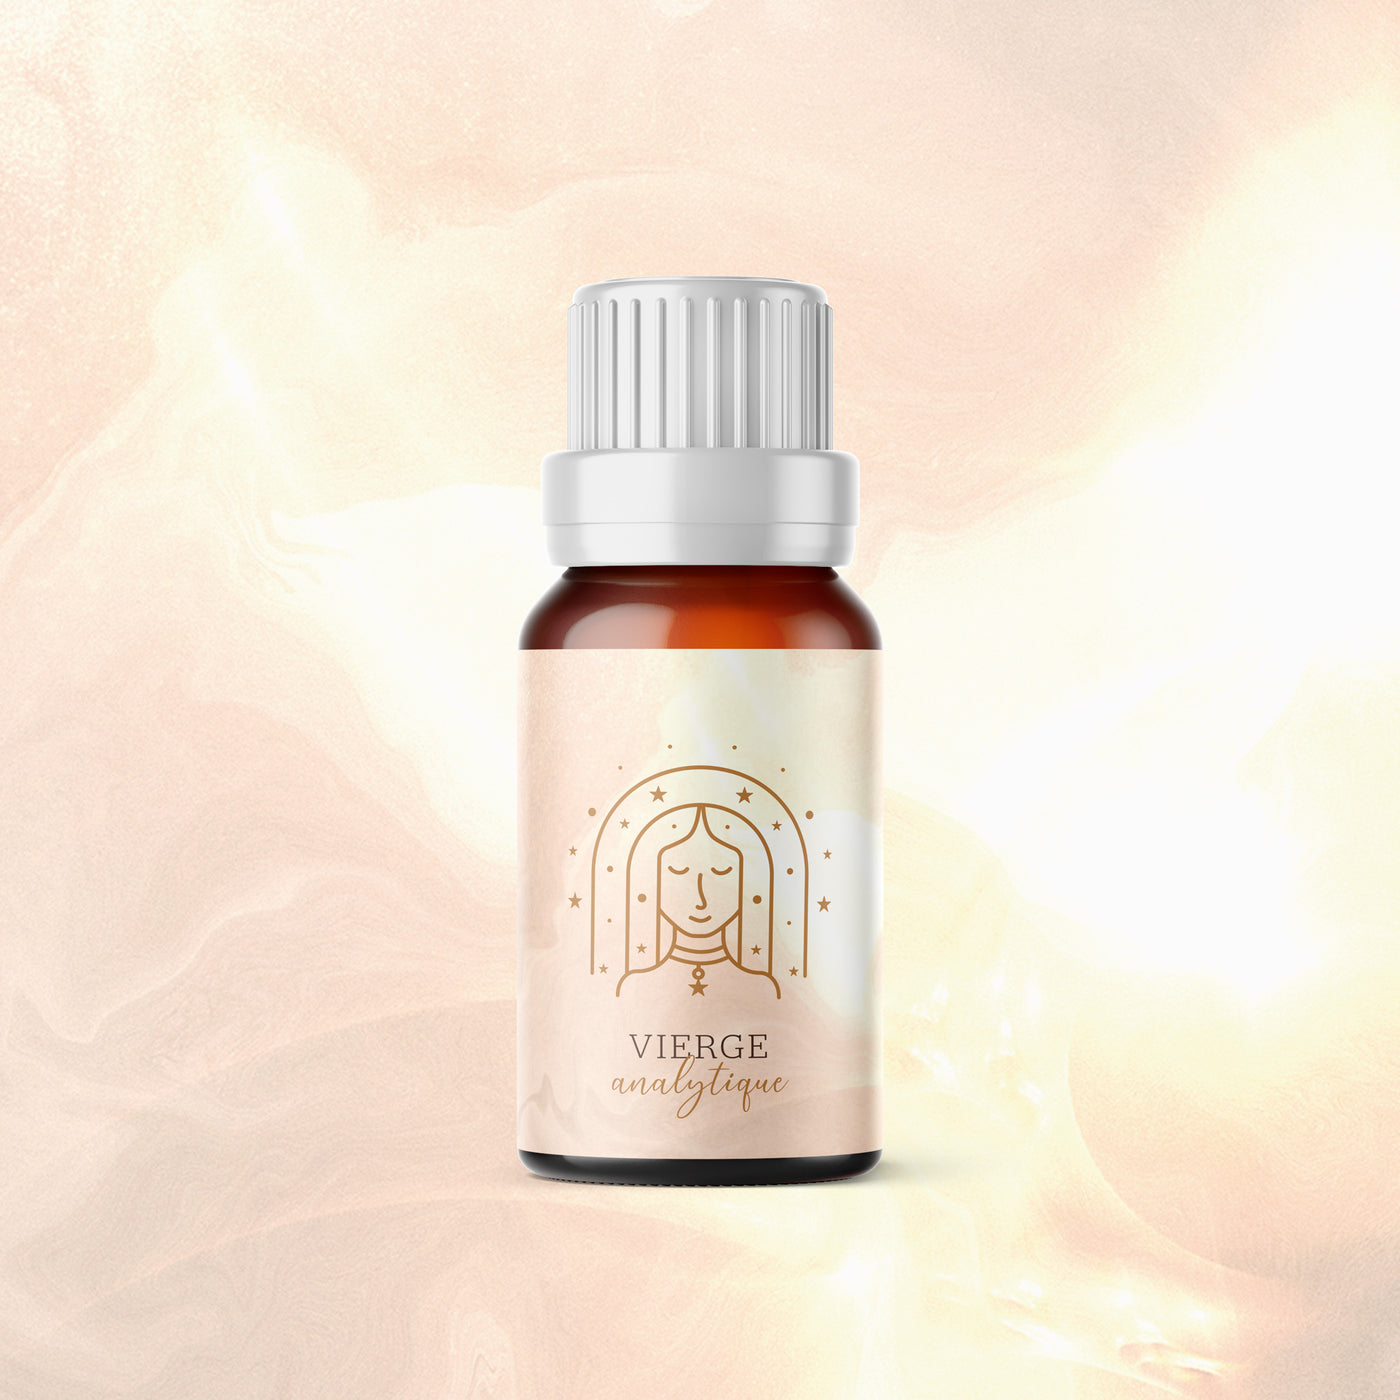 Vierge - synergie aromatique 100% pure